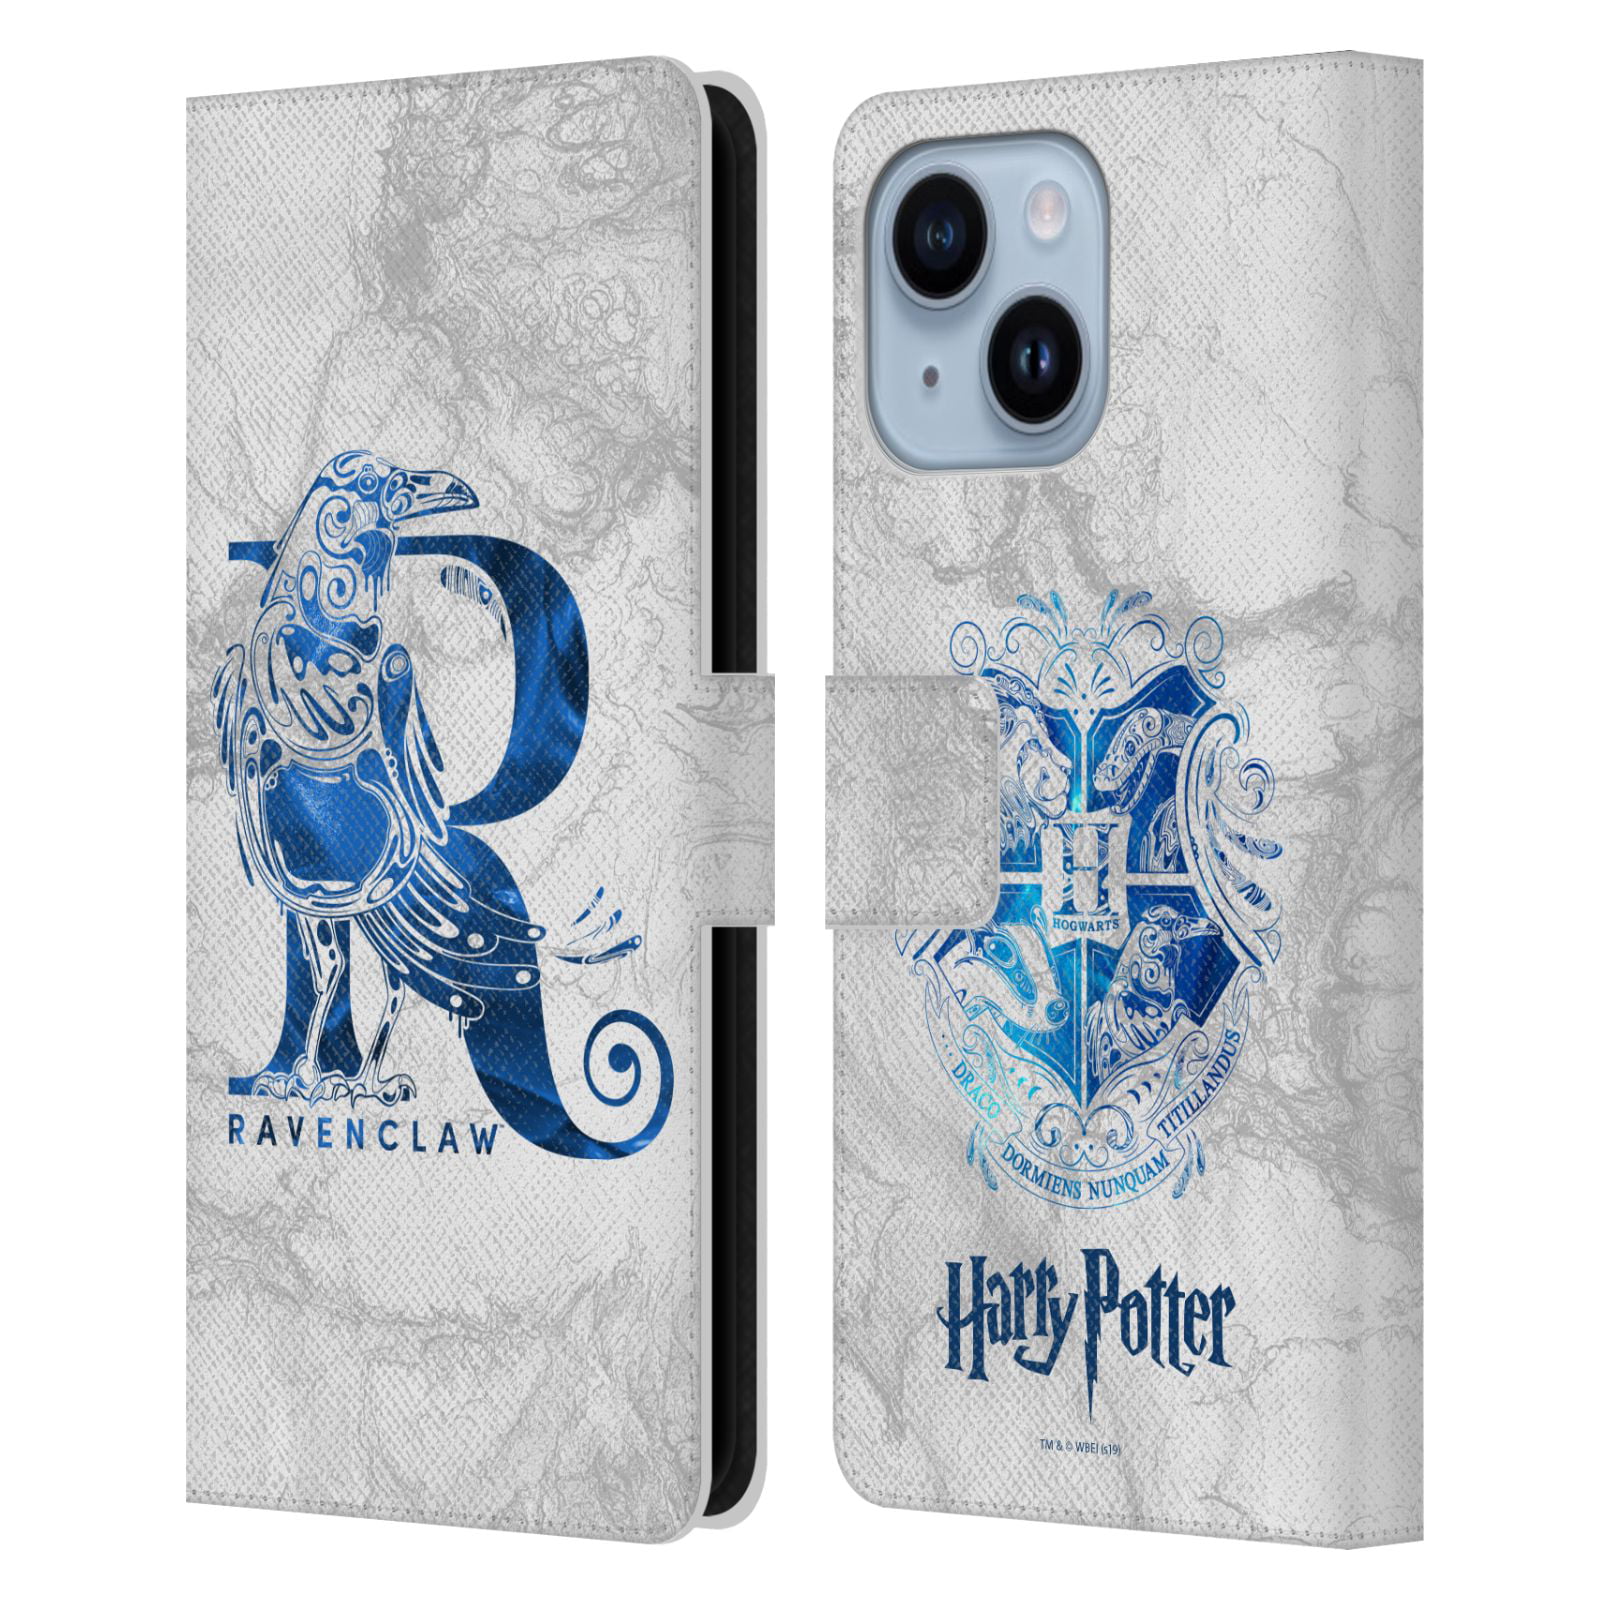 Harry Potter, Lightning Scar and Glasses Otterbox iPhone Case